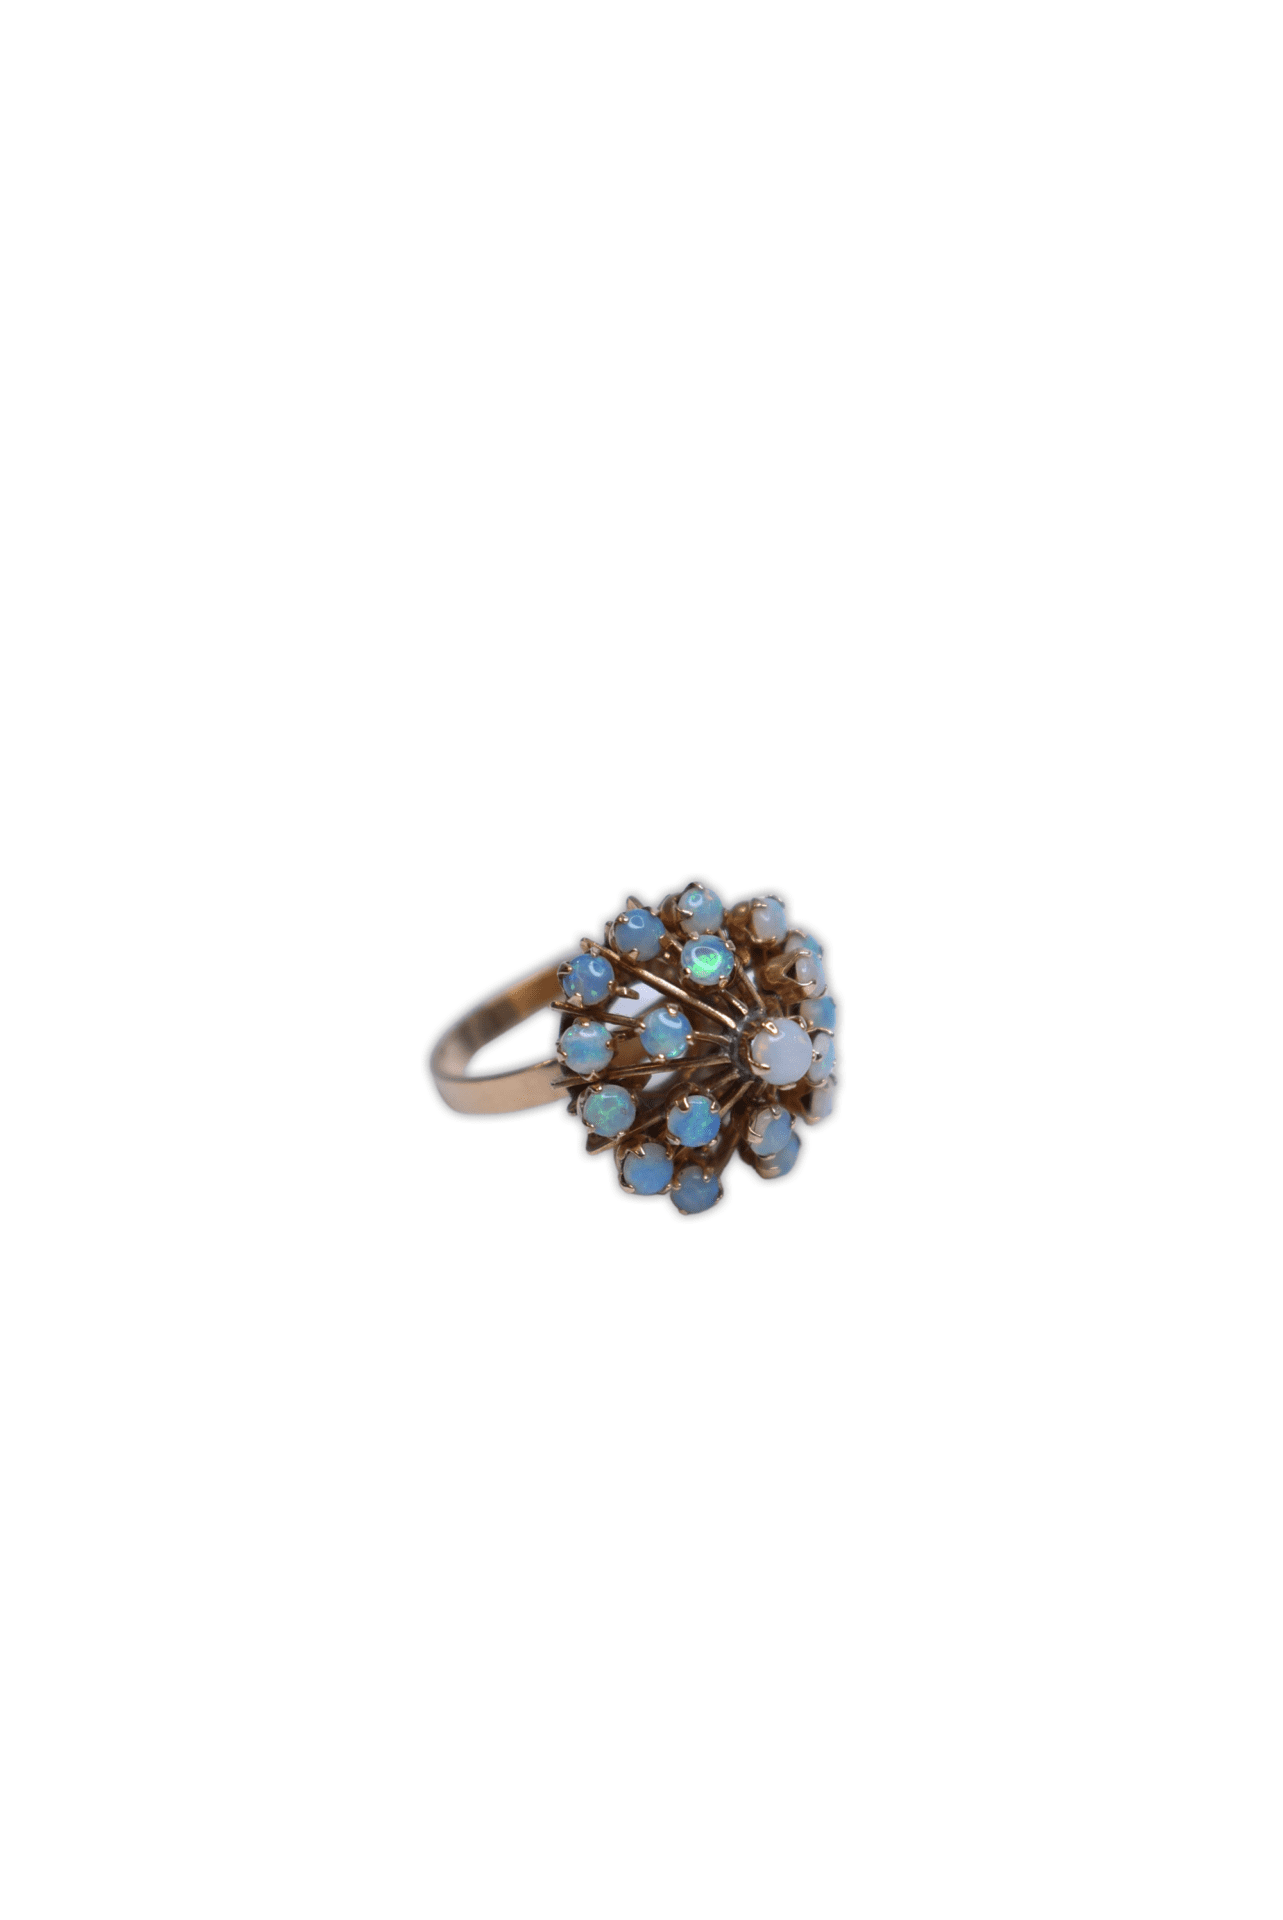 Dove Hospice and Wellness. Stunning 14 carat gold ring with 19 small set in opal stones.